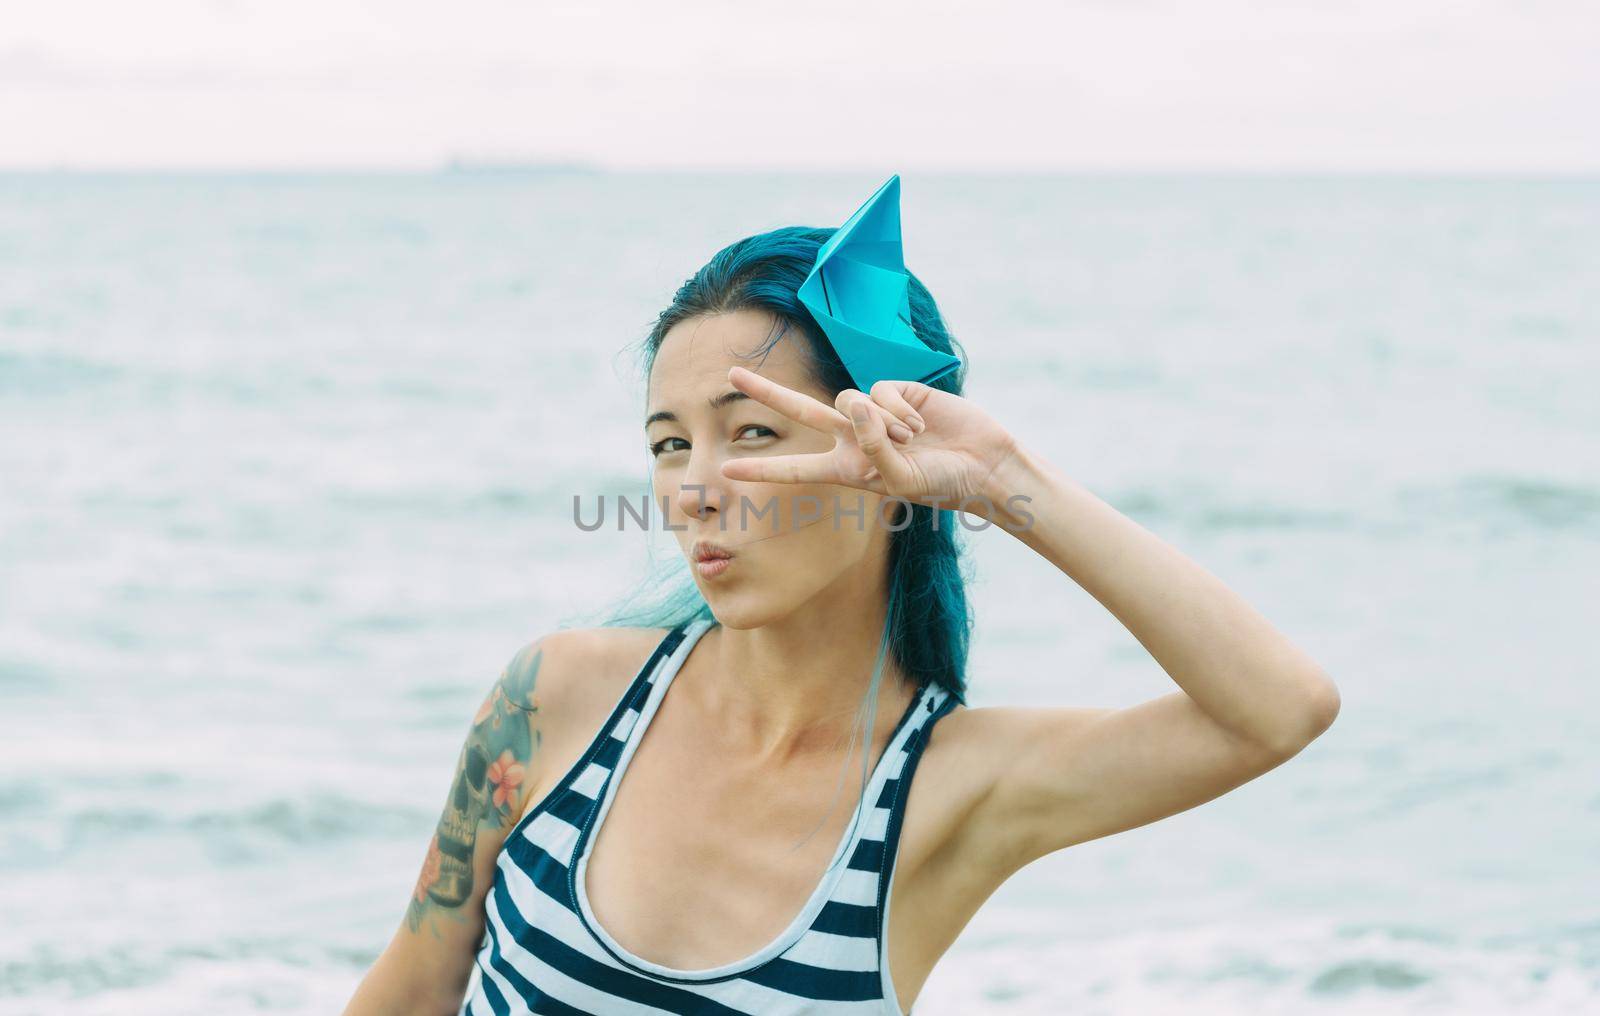 Beautiful young woman with blue hair resting on beach in summer. She raising her arm to her eye with peace sign